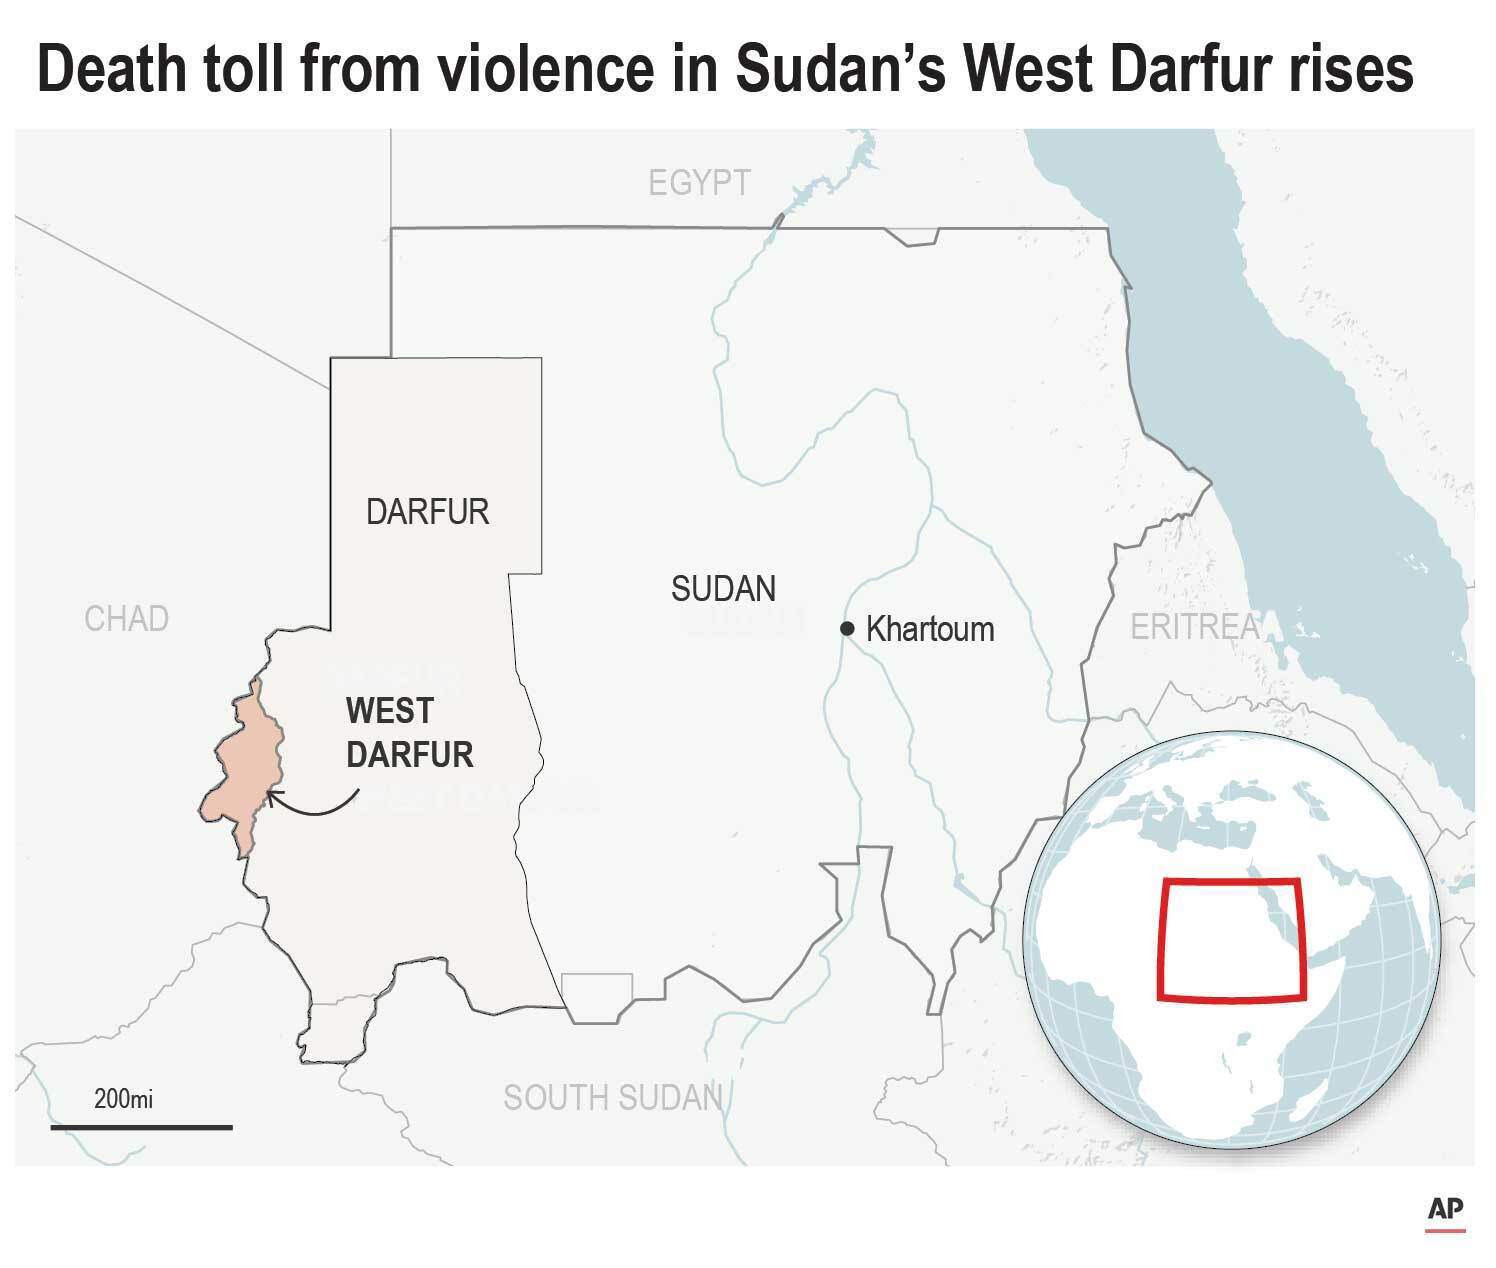 Death toll from violence in Sudan's West Darfur rises to 83